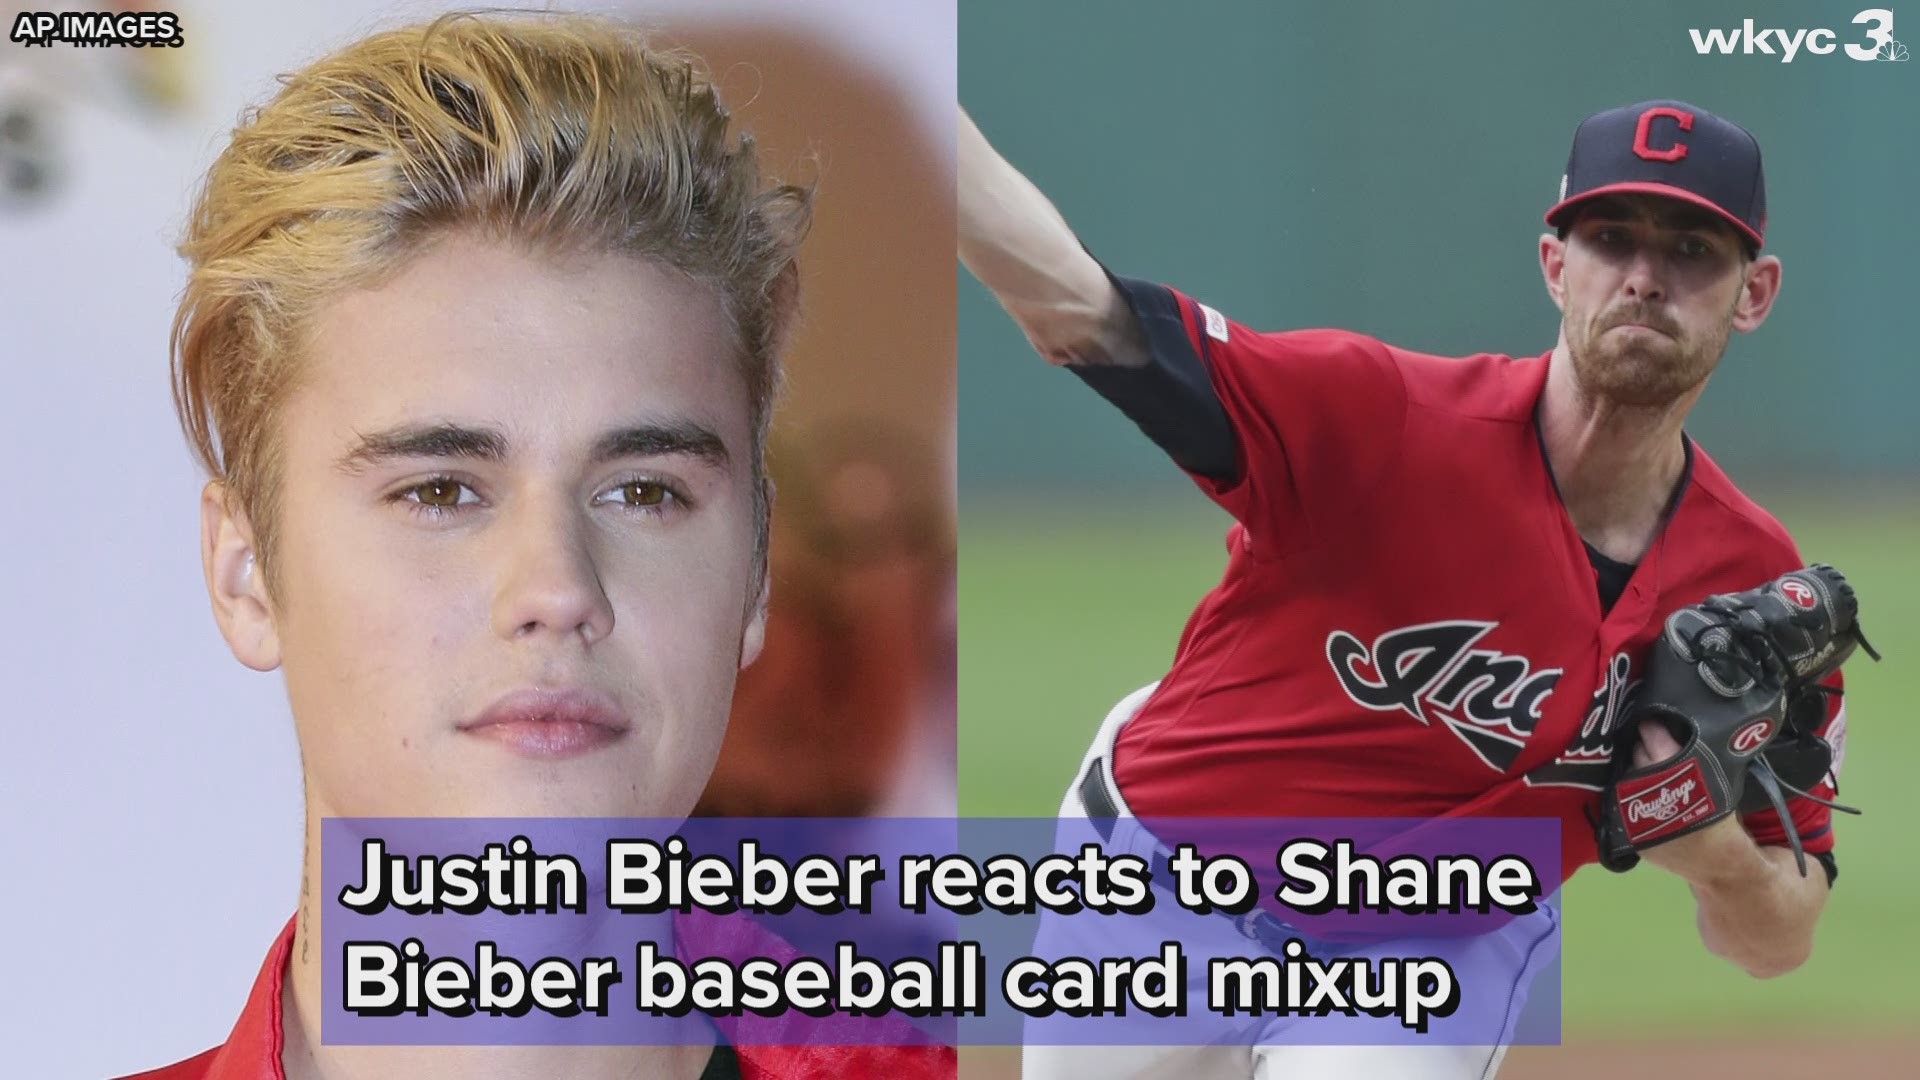 "I feel like we have a special connection," Justin Bieber told Cleveland Indians starting pitcher Shane Bieber via Twitter.